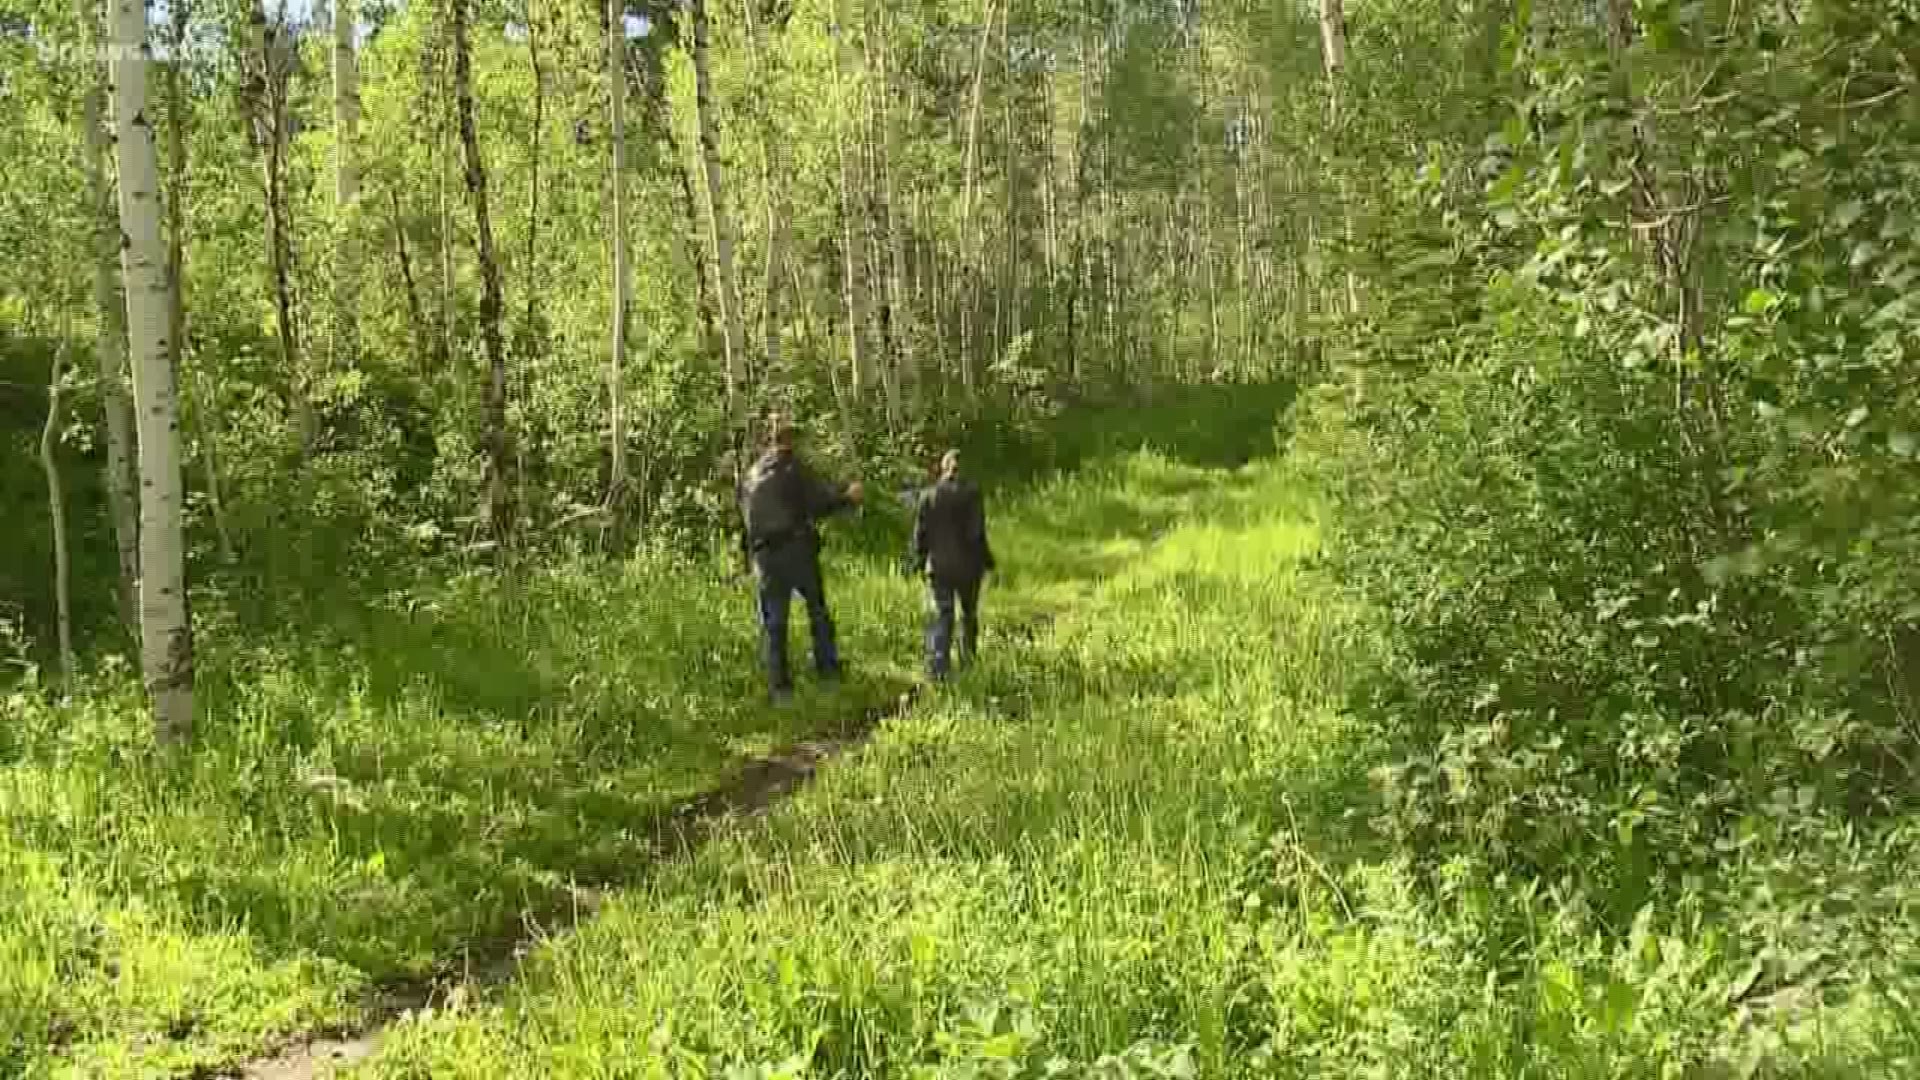 While it sounds like something not appropriate for television news, forest bathing has been catching on all over Colorado.